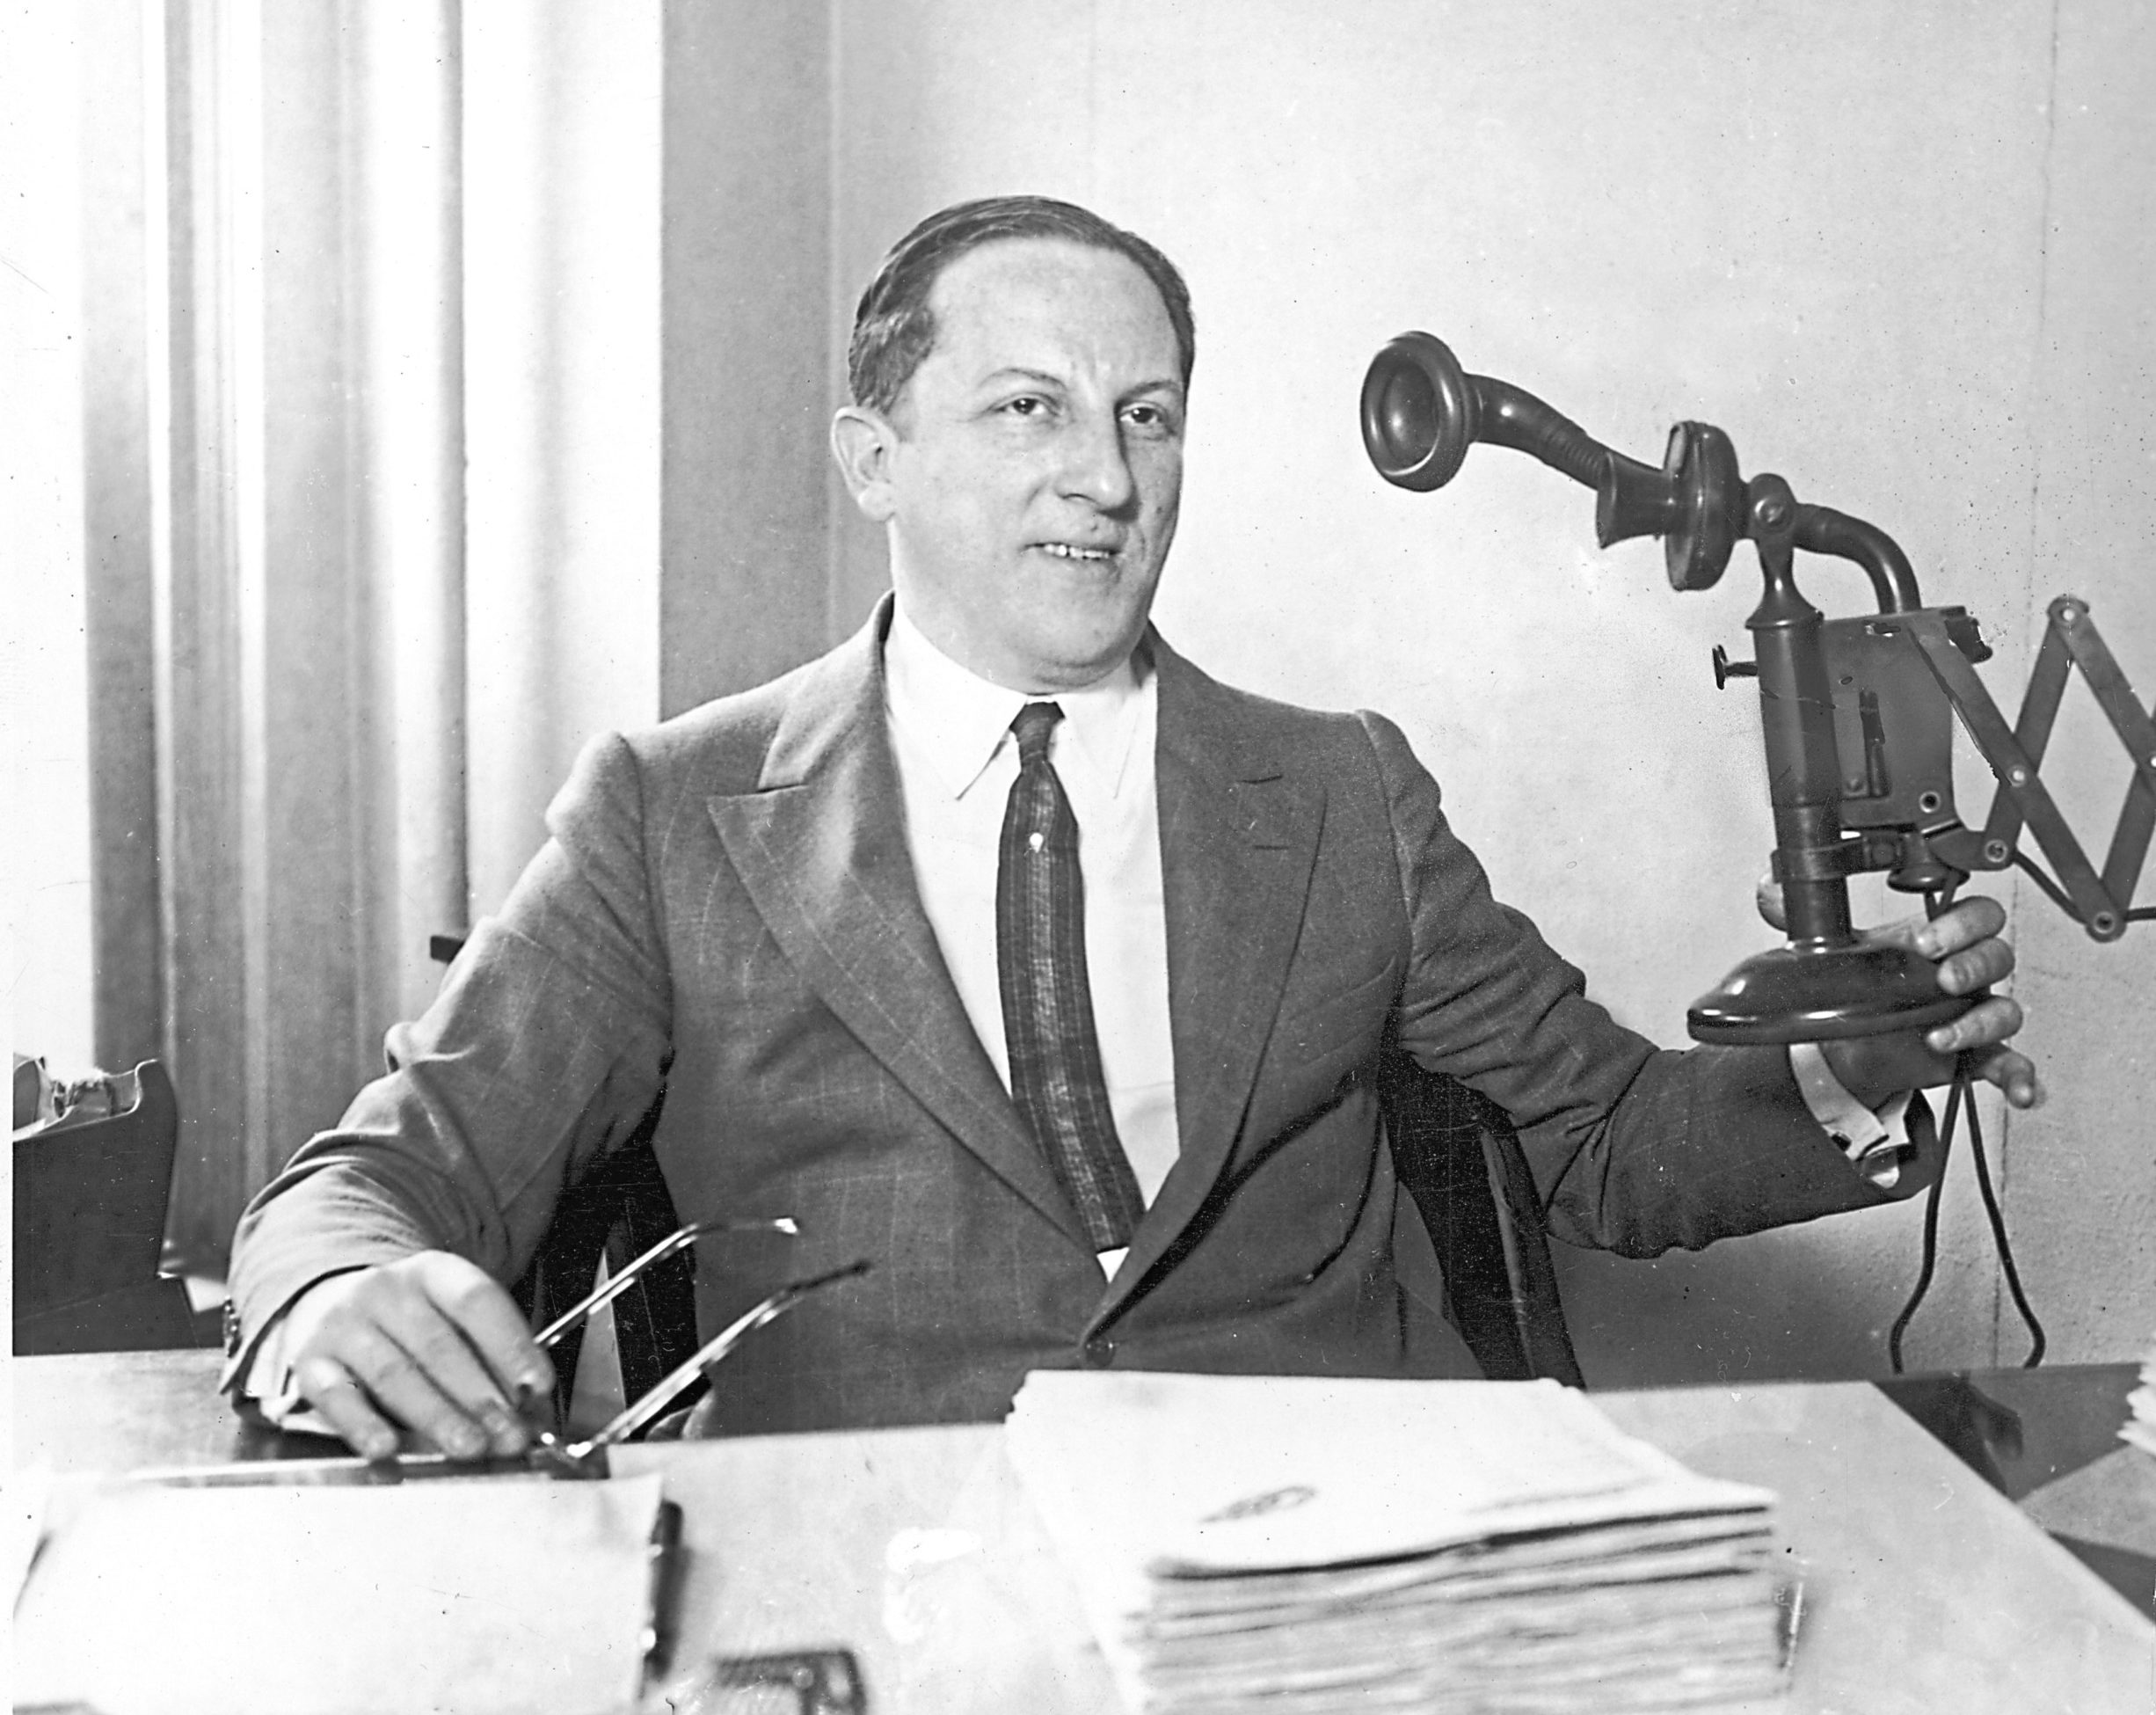 American professional gambler Arnold Rothstein. He was accused of masterminding the Black Sox baseball scandal of 1919, in which eight team members of the Chicago White Sox confessed to accepting bribes to throw the World Series to the Cincinnati Reds.